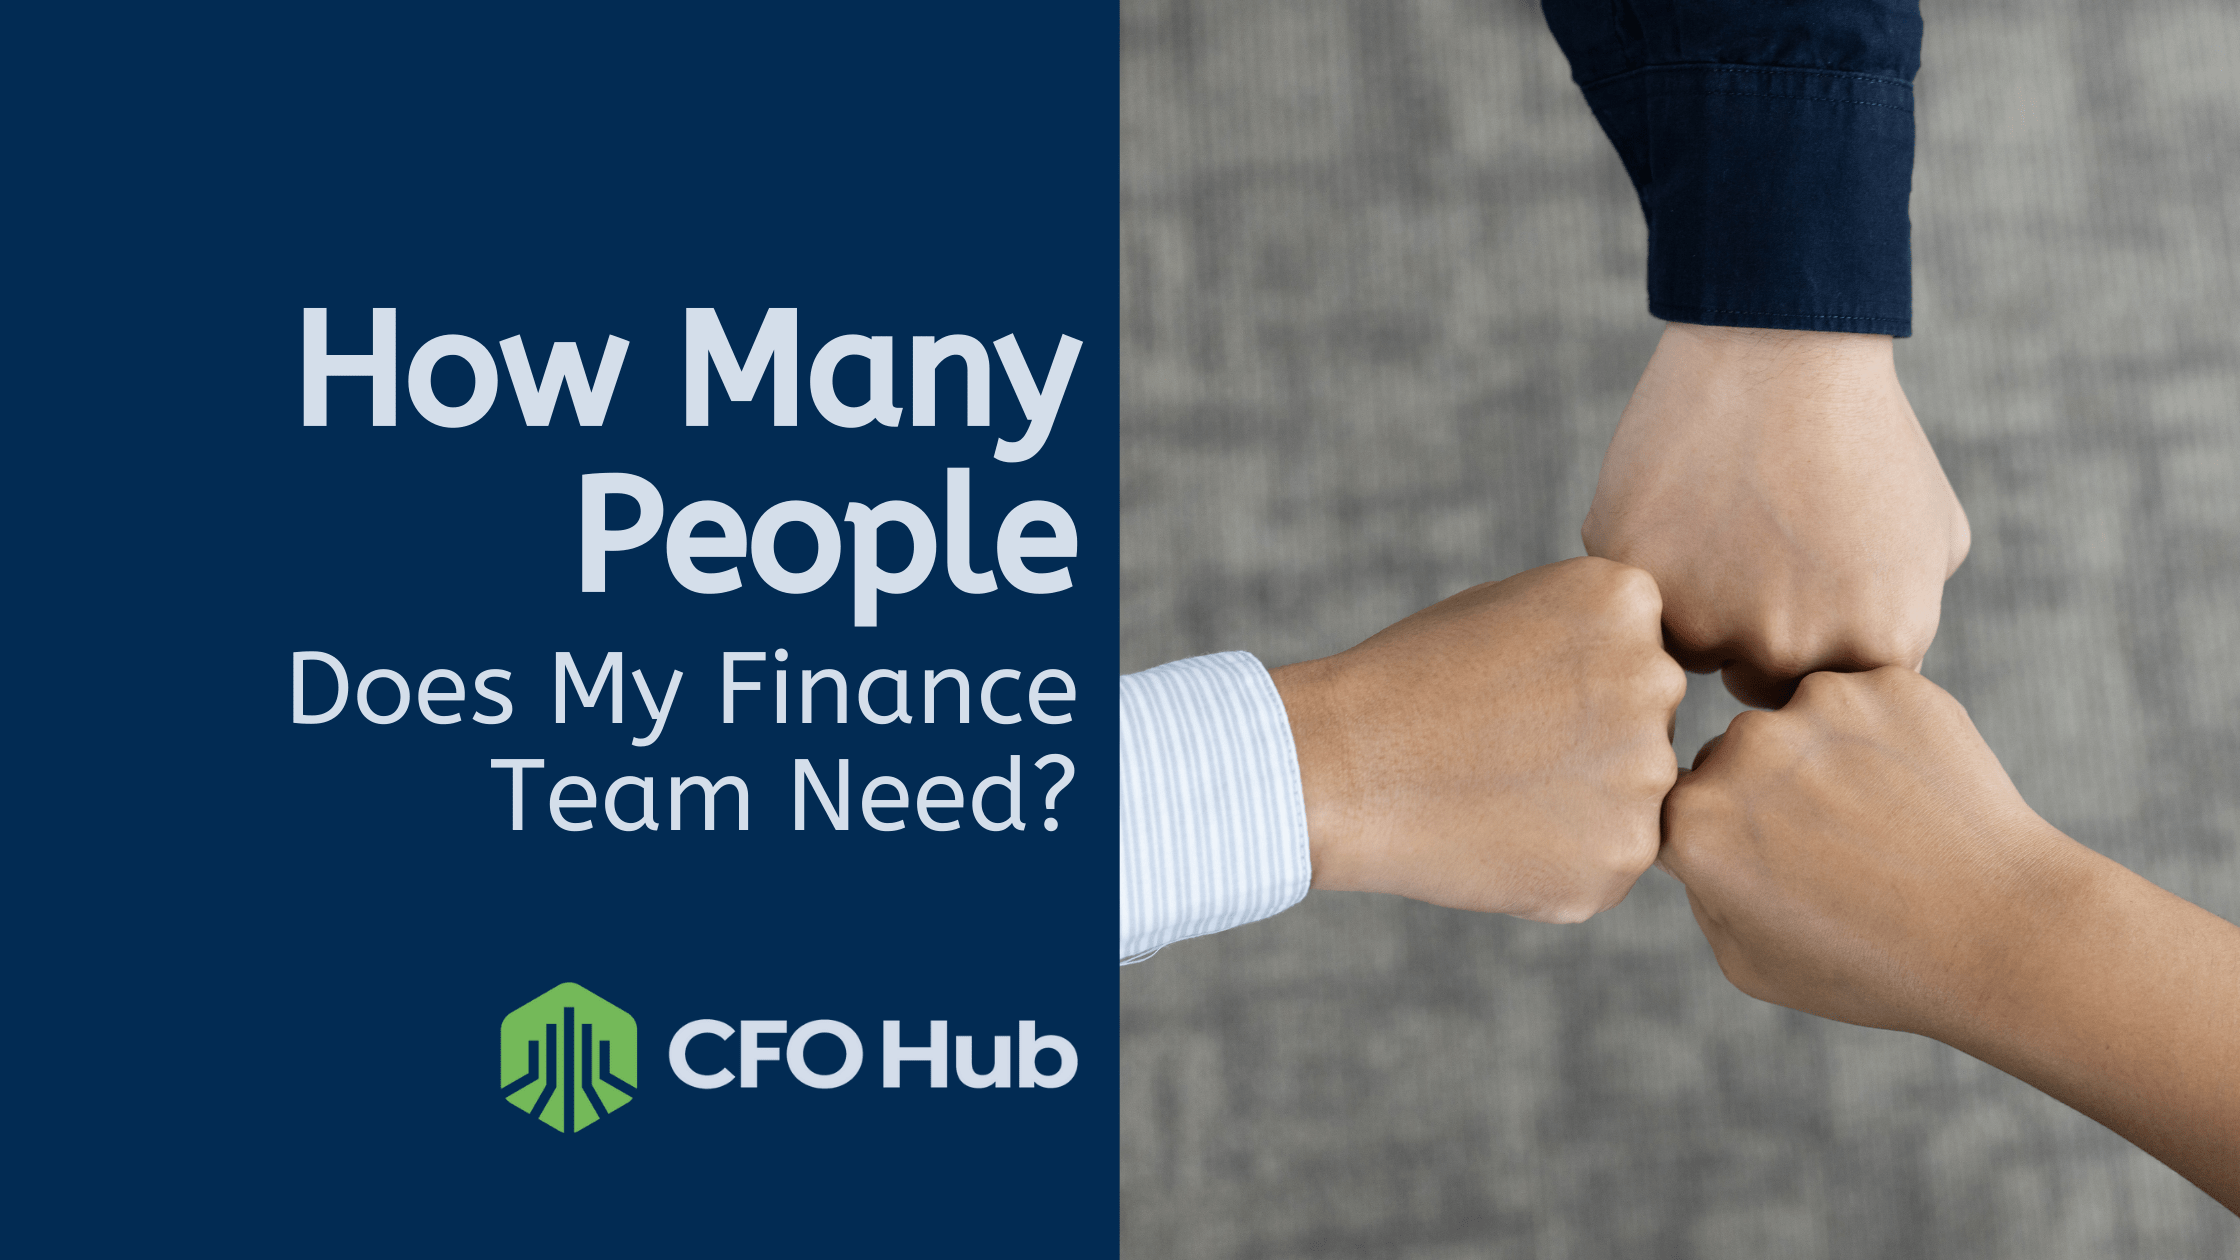 Graphic with the text 'How Many People Does My Finance Team Need?' and 'CFO Hub' on a blue background. To the right, three hands engaged in a fist bump represent finance team size and collaboration.